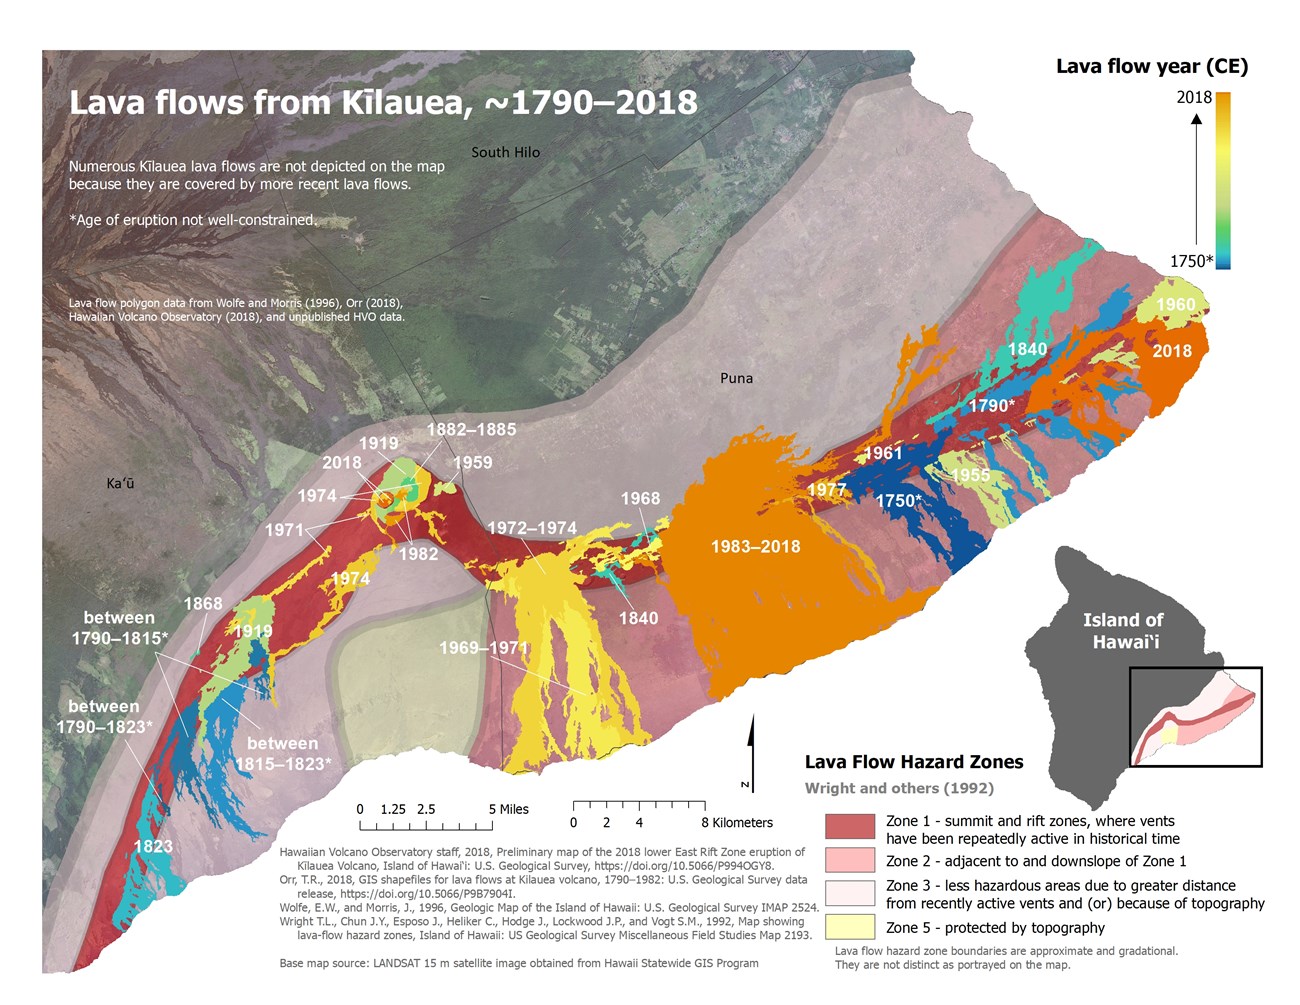 Map showing the subaerial extents of historical lava flows from Kīlauea. Lava flow hazard zones and districts of the County of Hawai‘i are also depicted.